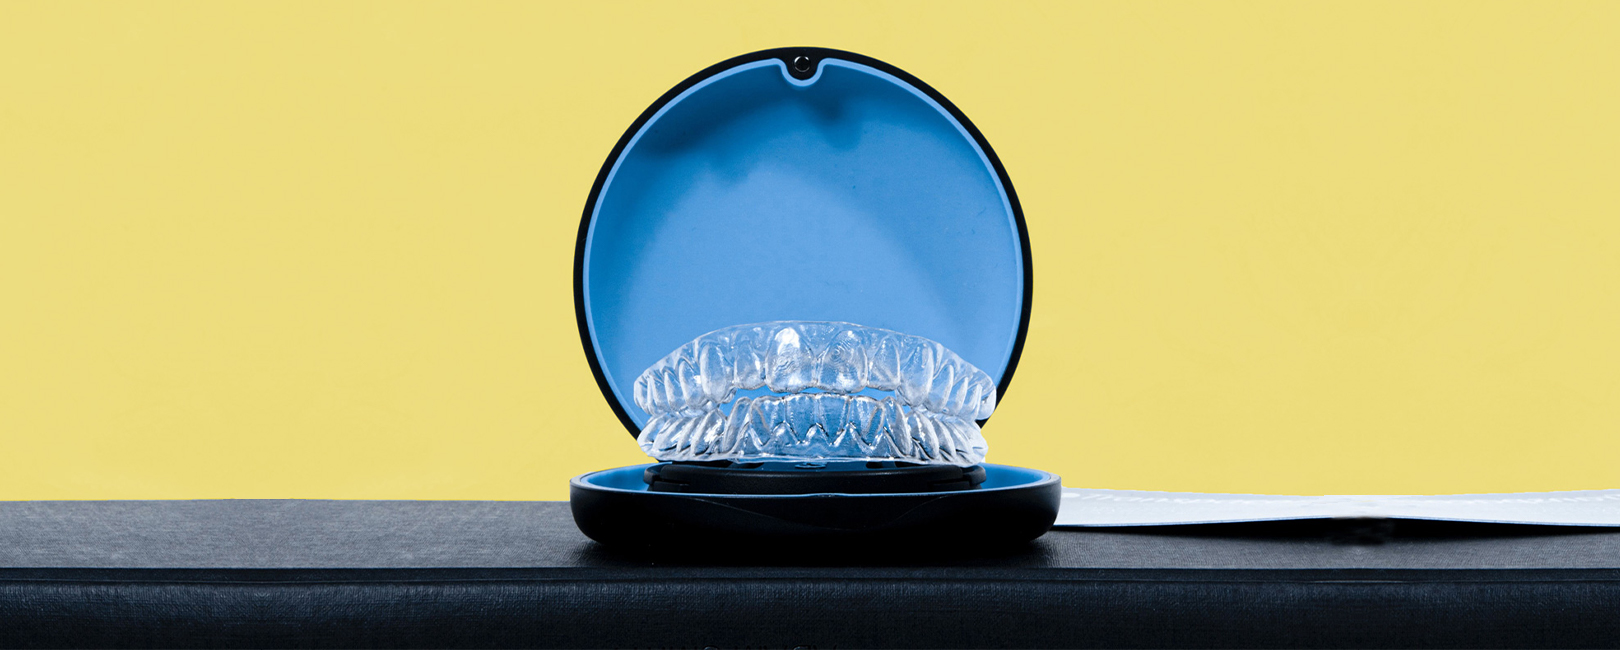 A clear braces with a blue case is lain on top of a yellow background.